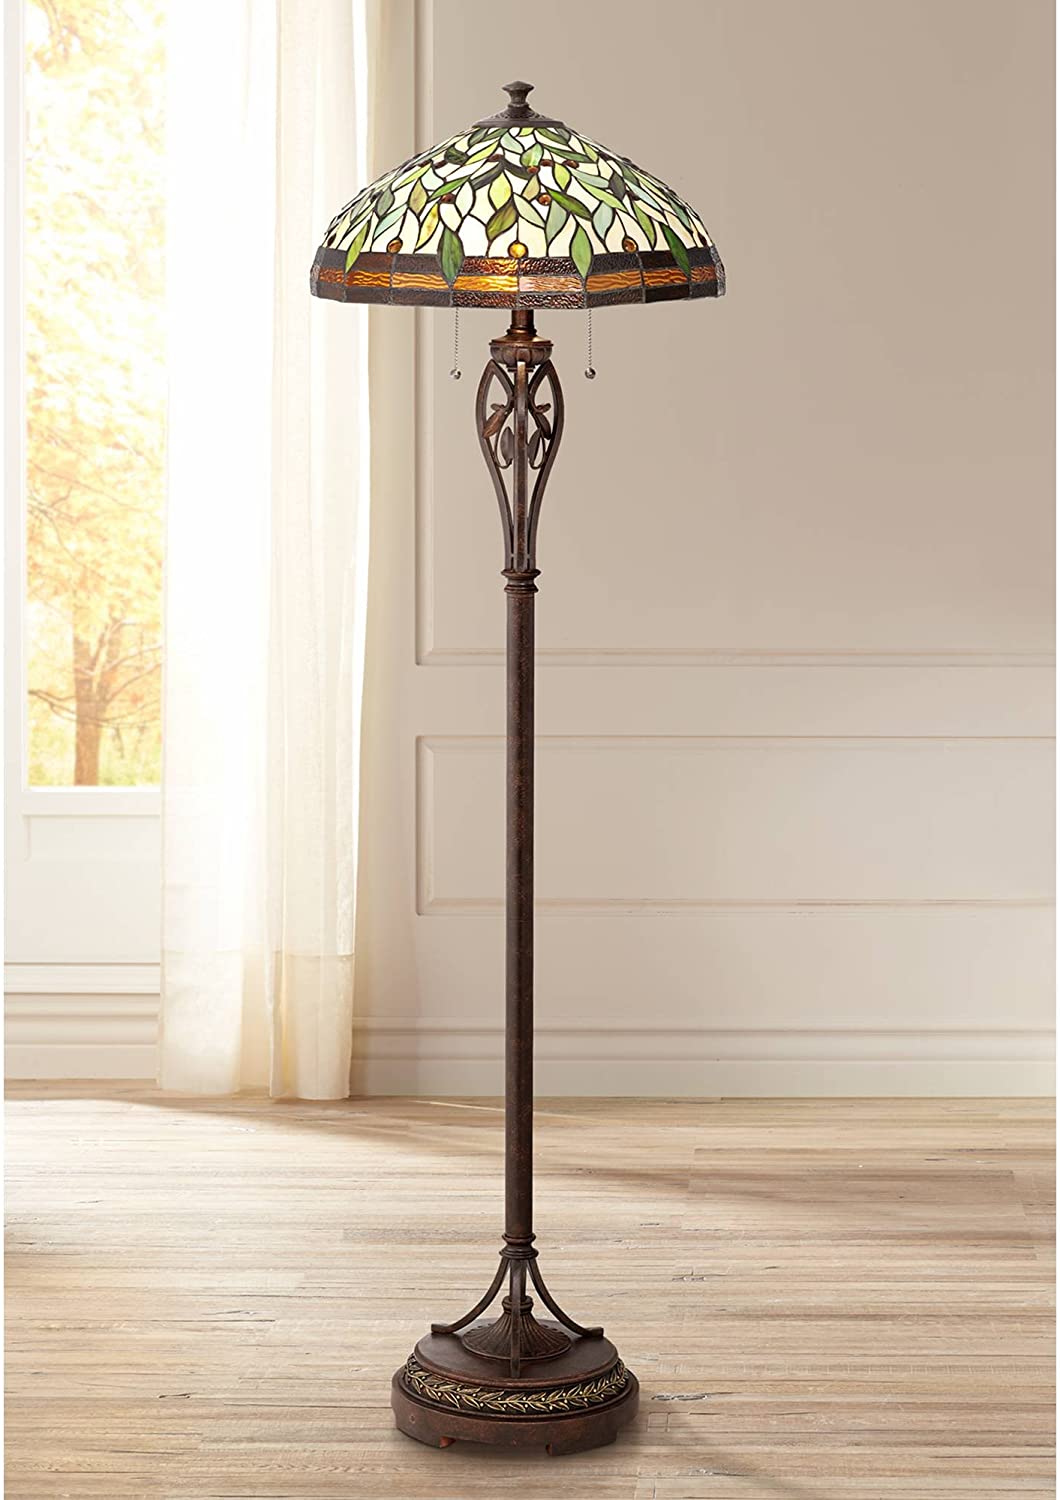 Perfect tiffany style floor lamps for your home